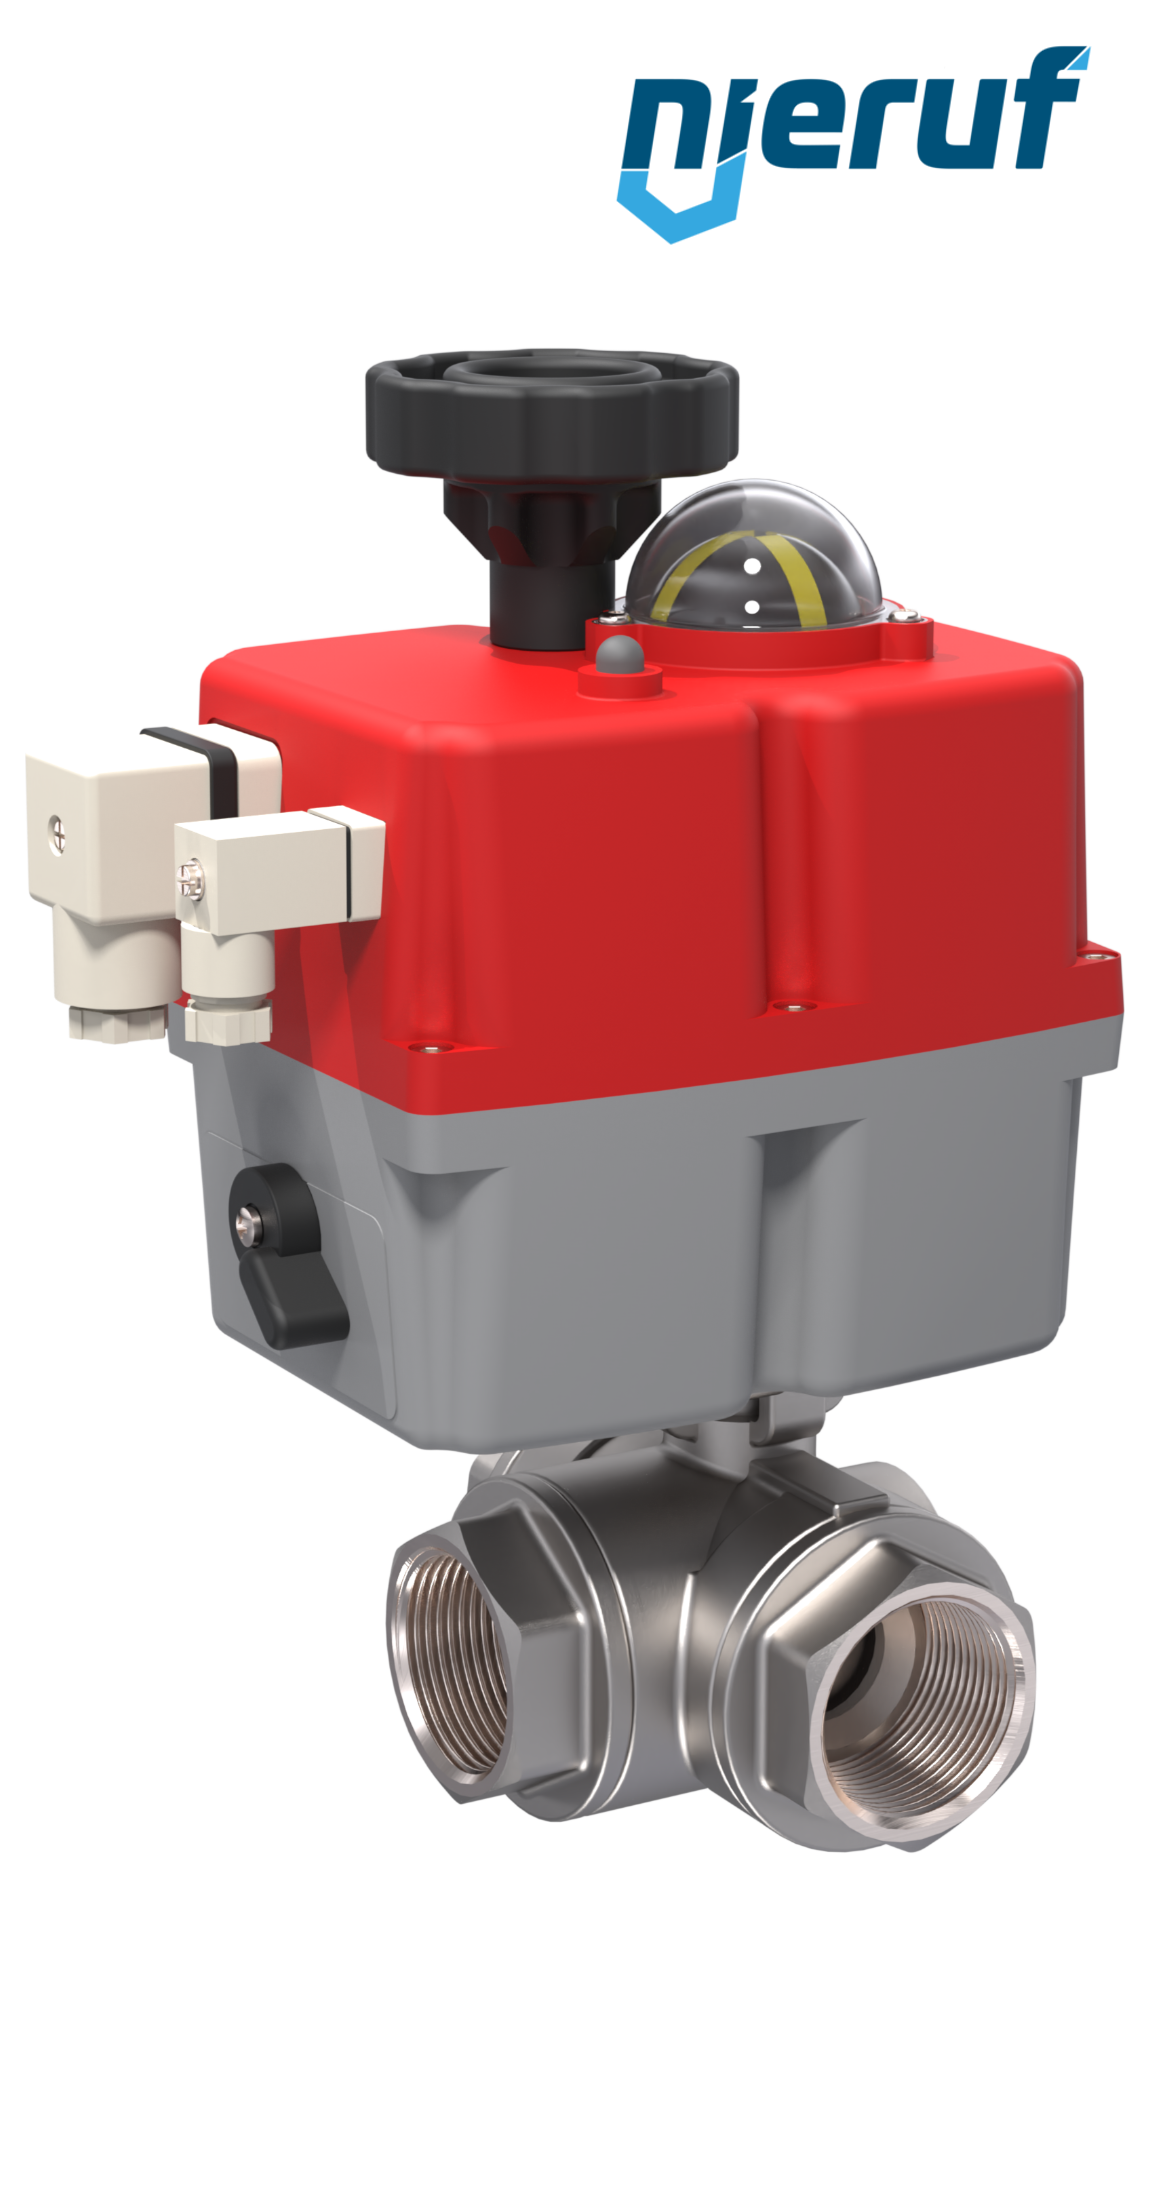 3 way automatic-ball valve 24-240V DN8 - 1/4" inch stainless steel reduced port design with L drilling